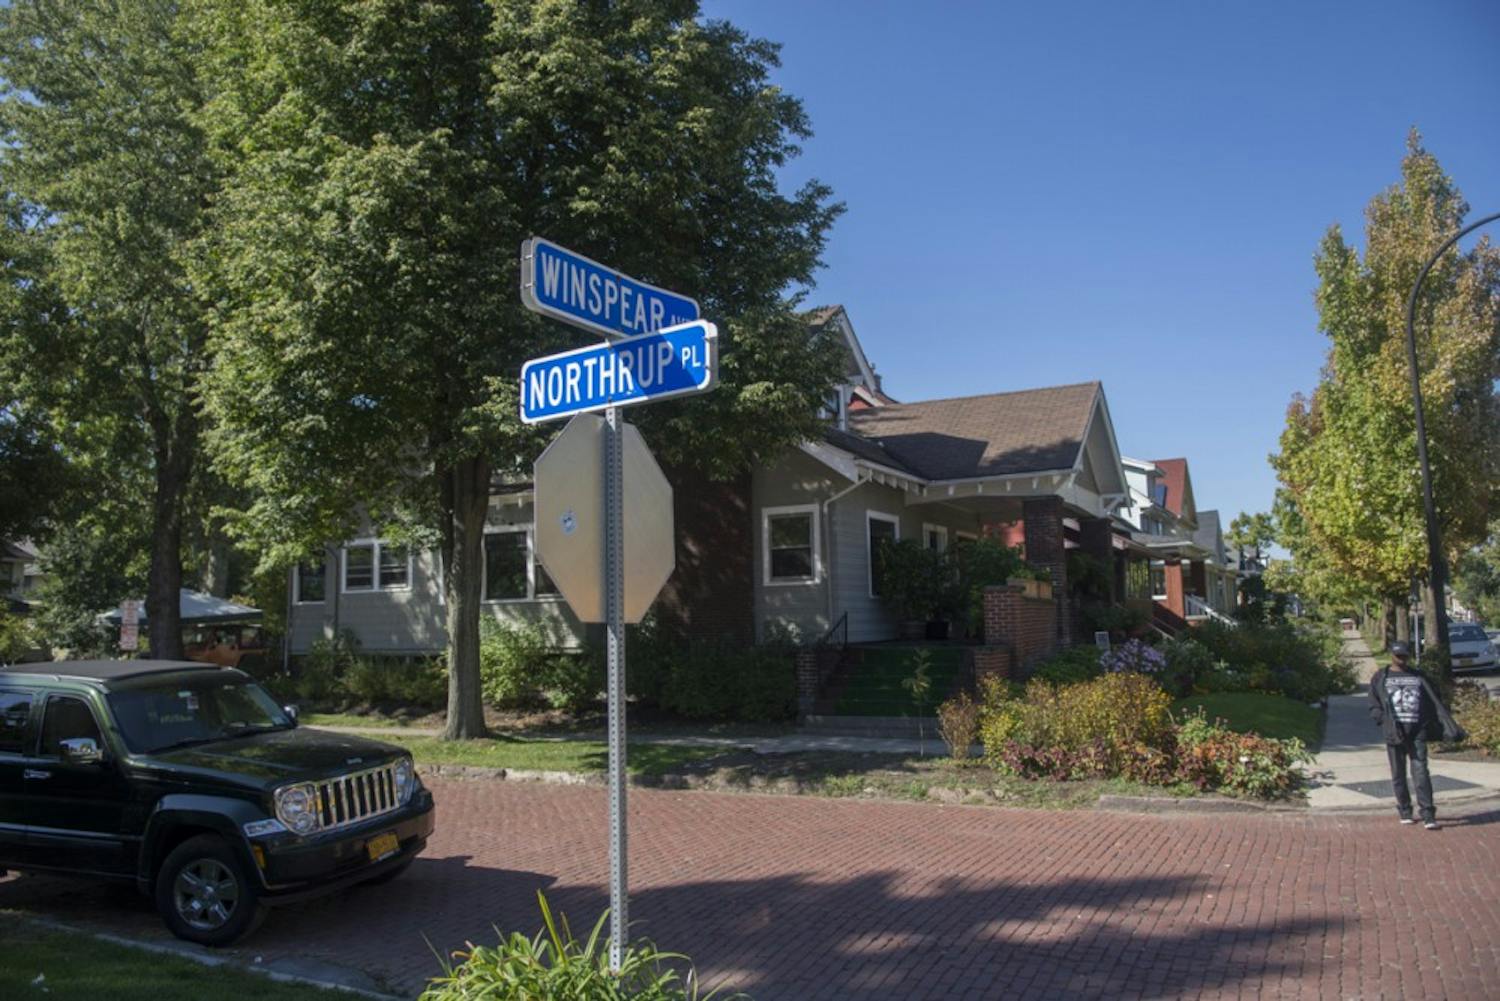 Winspear Avenue and Northrup Place are two common streets UB students live on in the University Heights neighborhood. Many students have complained that&nbsp;their Heights&nbsp;landlord, Jeremy Dunn, is&nbsp;not fixing problems in their&nbsp;houses.